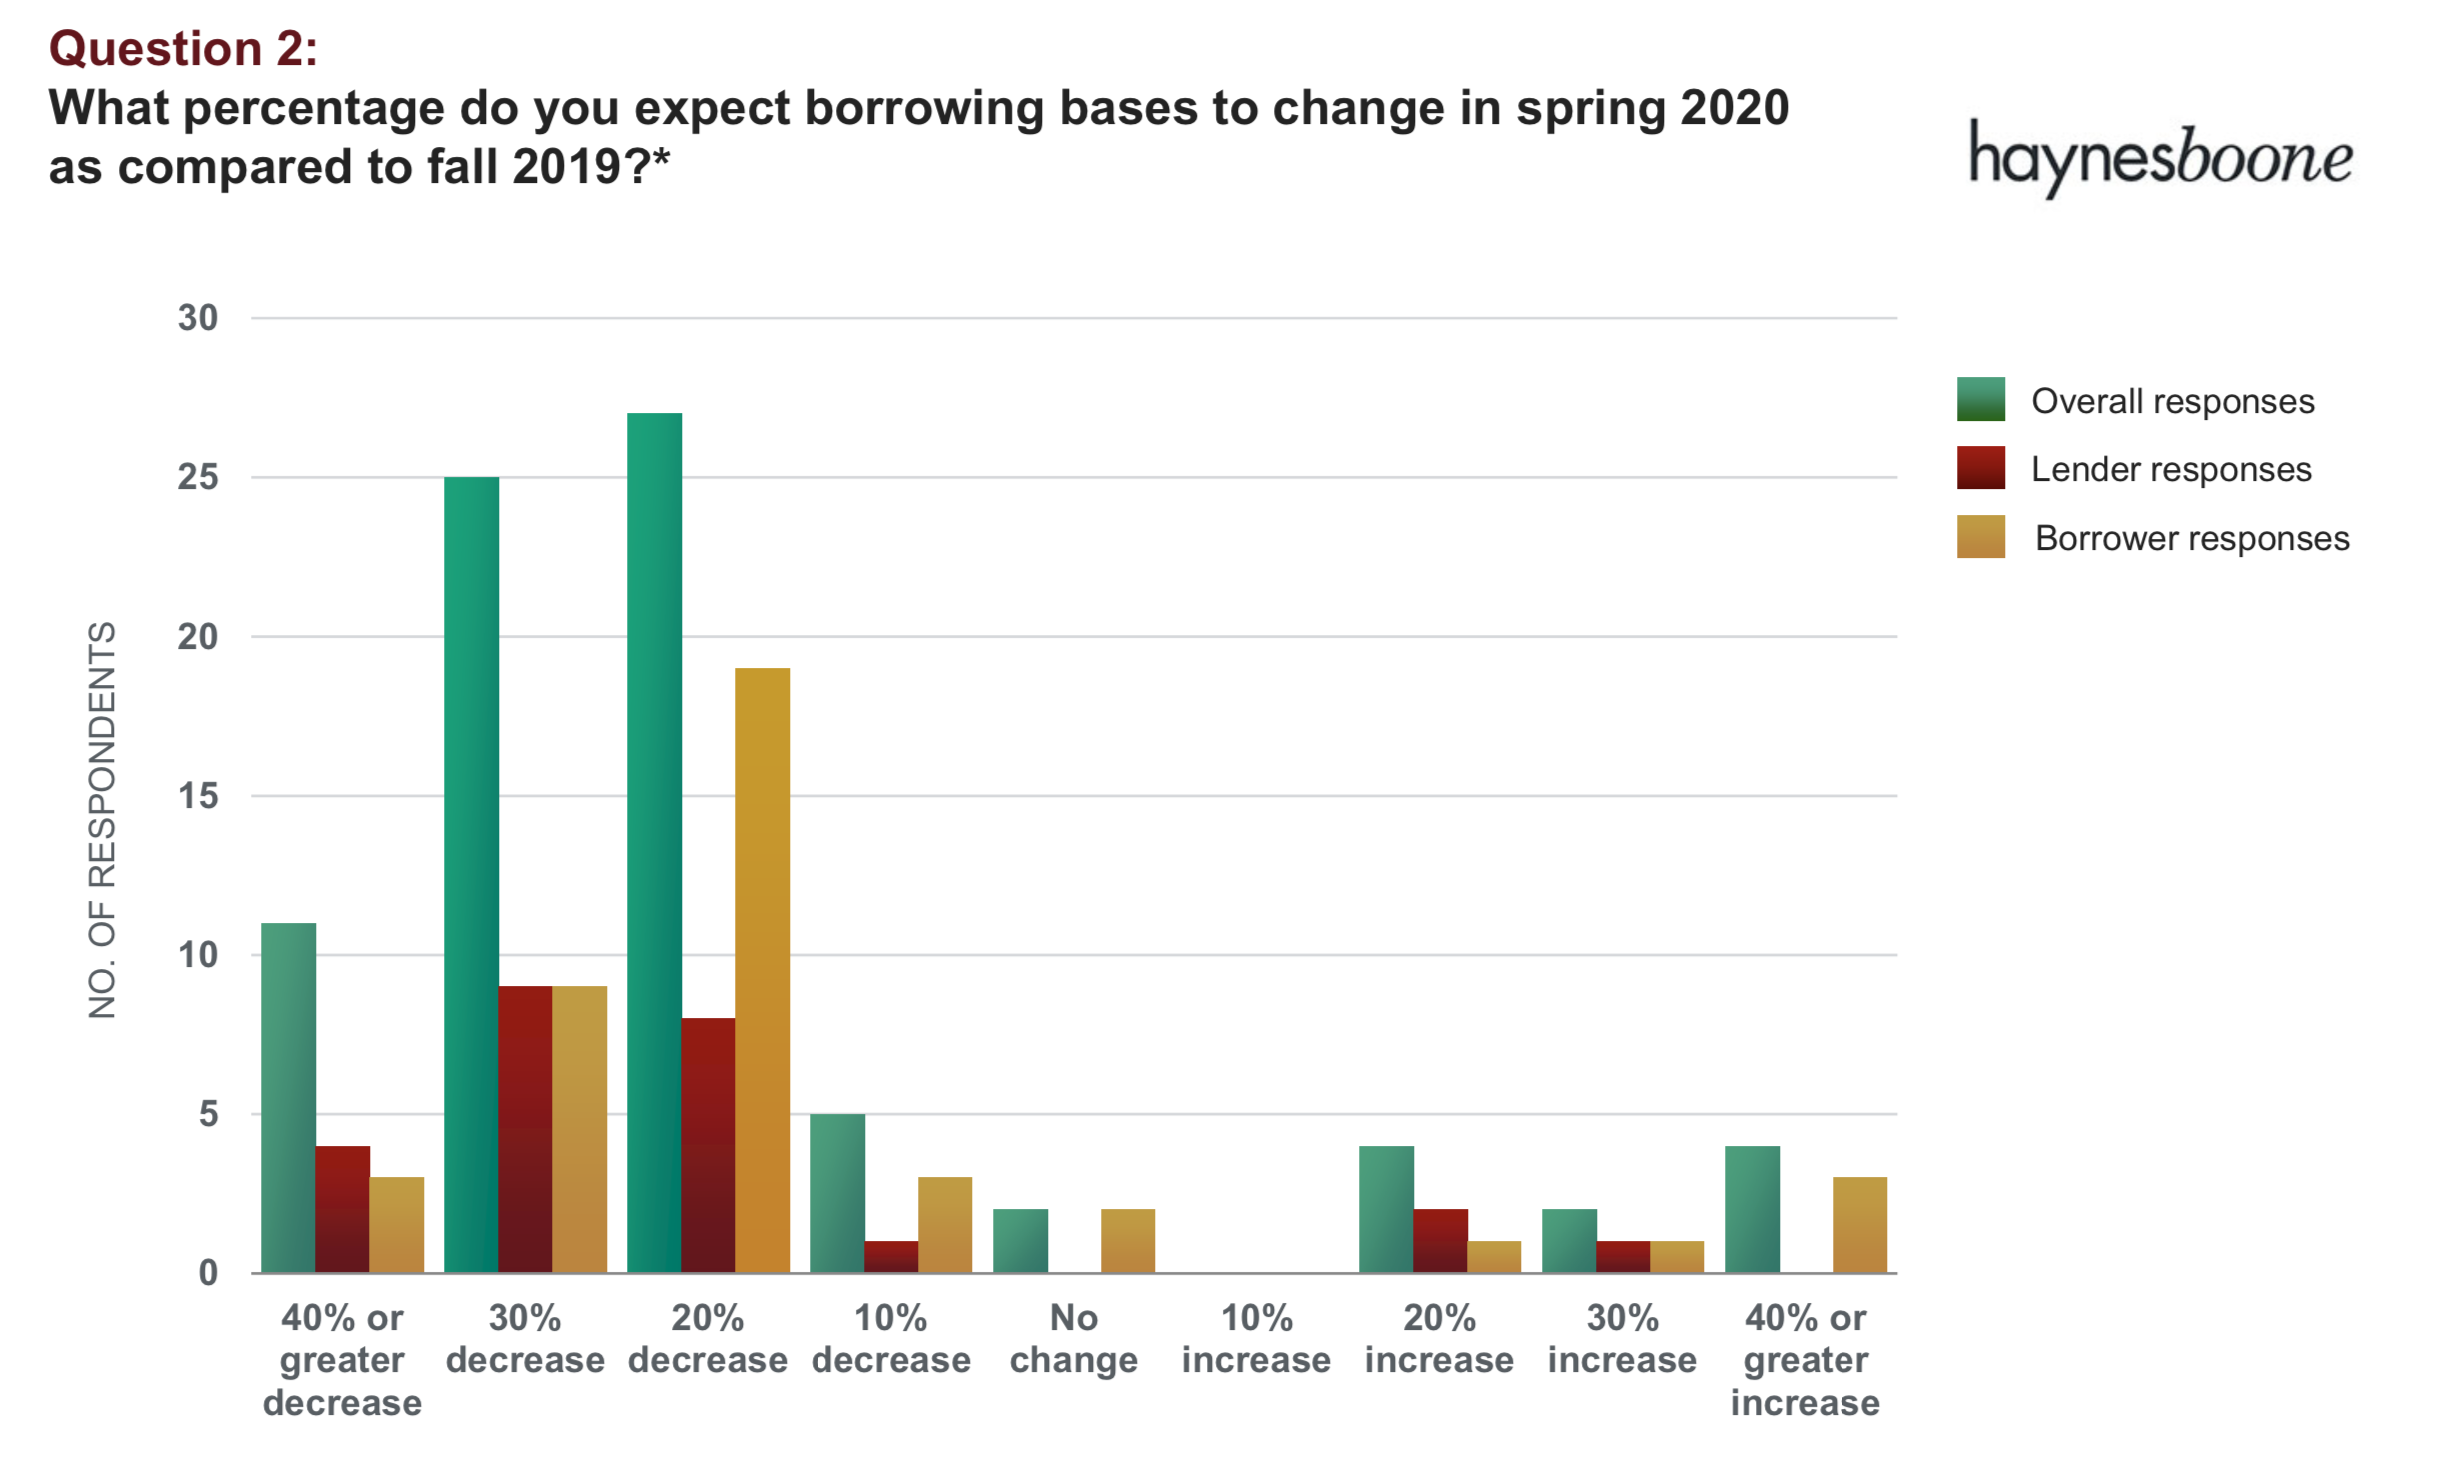 What percentage do you expect borrowing bases to change in spring 2020 as compared to fall 2019?